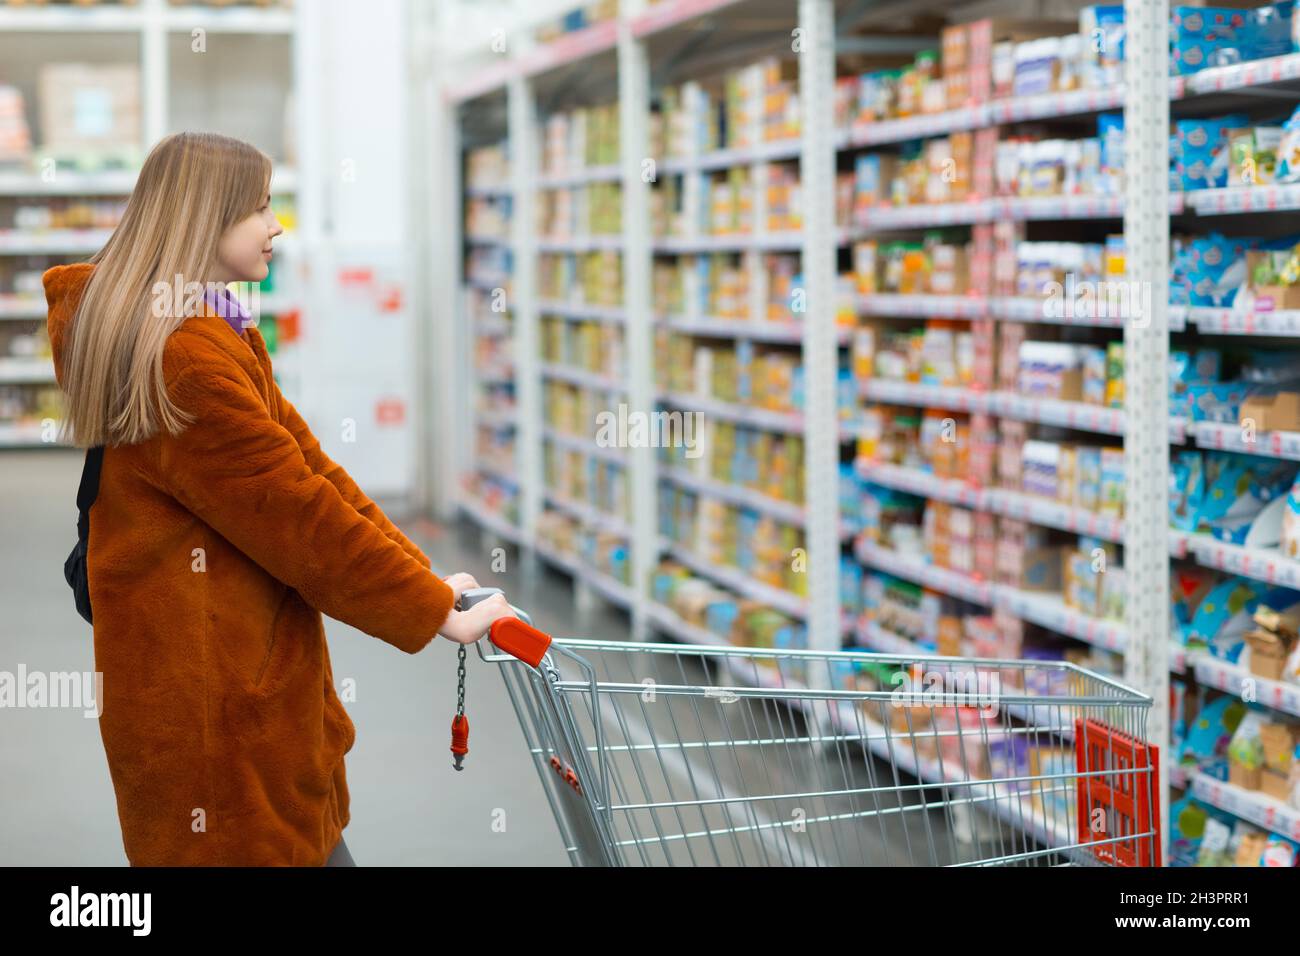 Woman with shopping cart at retail store shelves with food products. Stock Photo